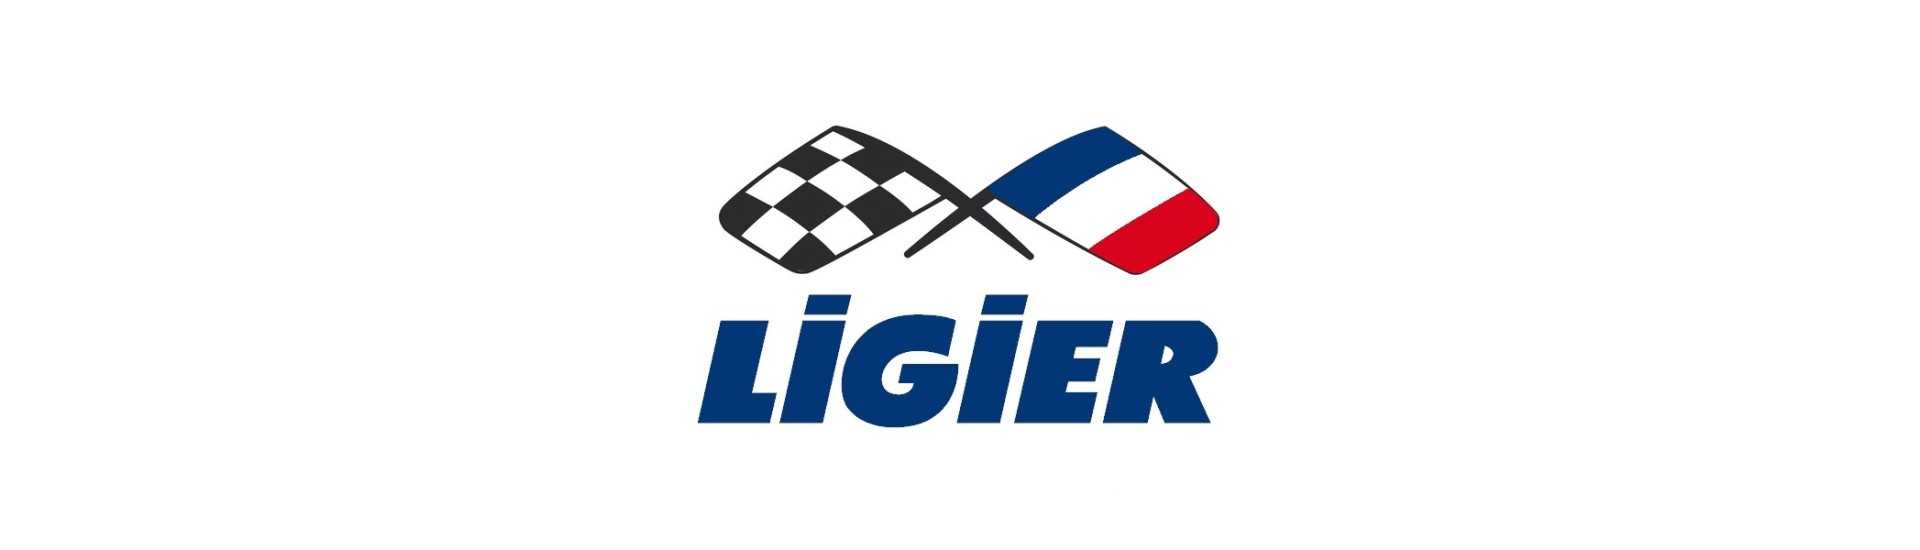 Best price safe for car without a permit Ligier